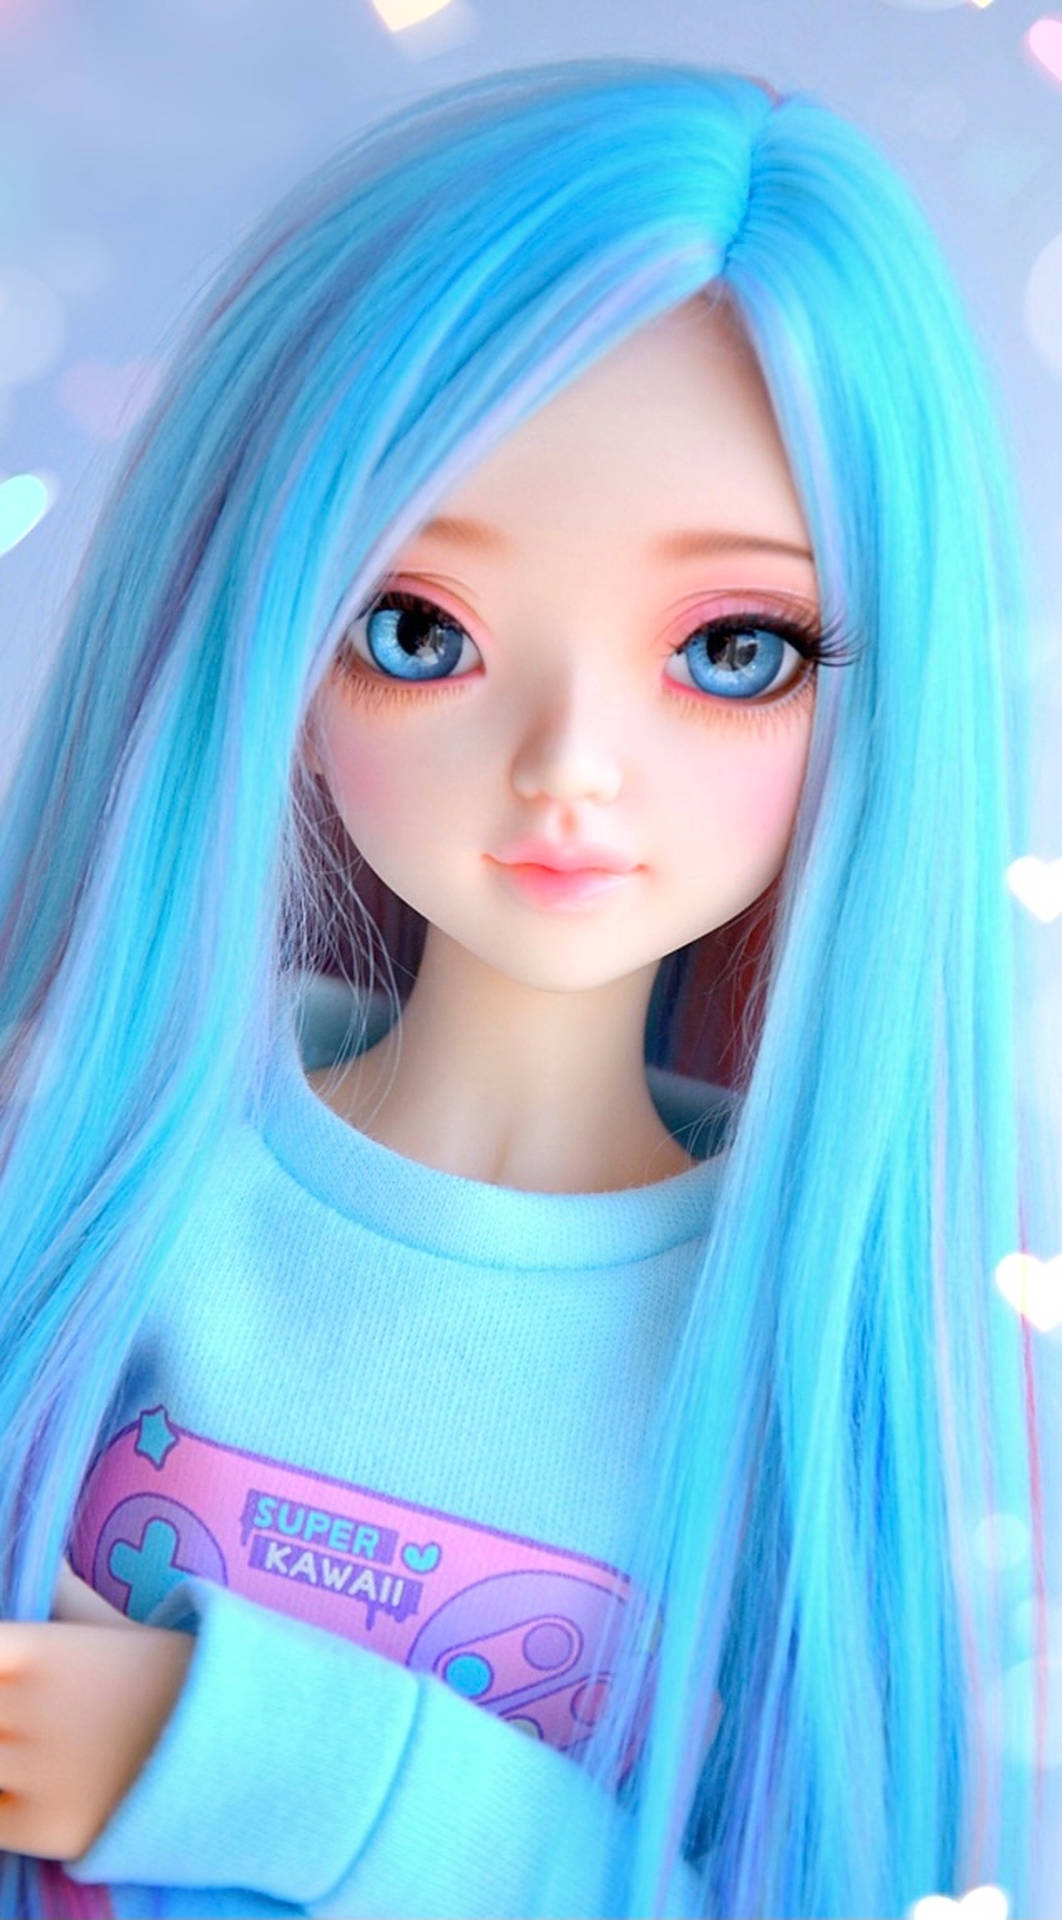 Pretty Blue Haired Doll Background